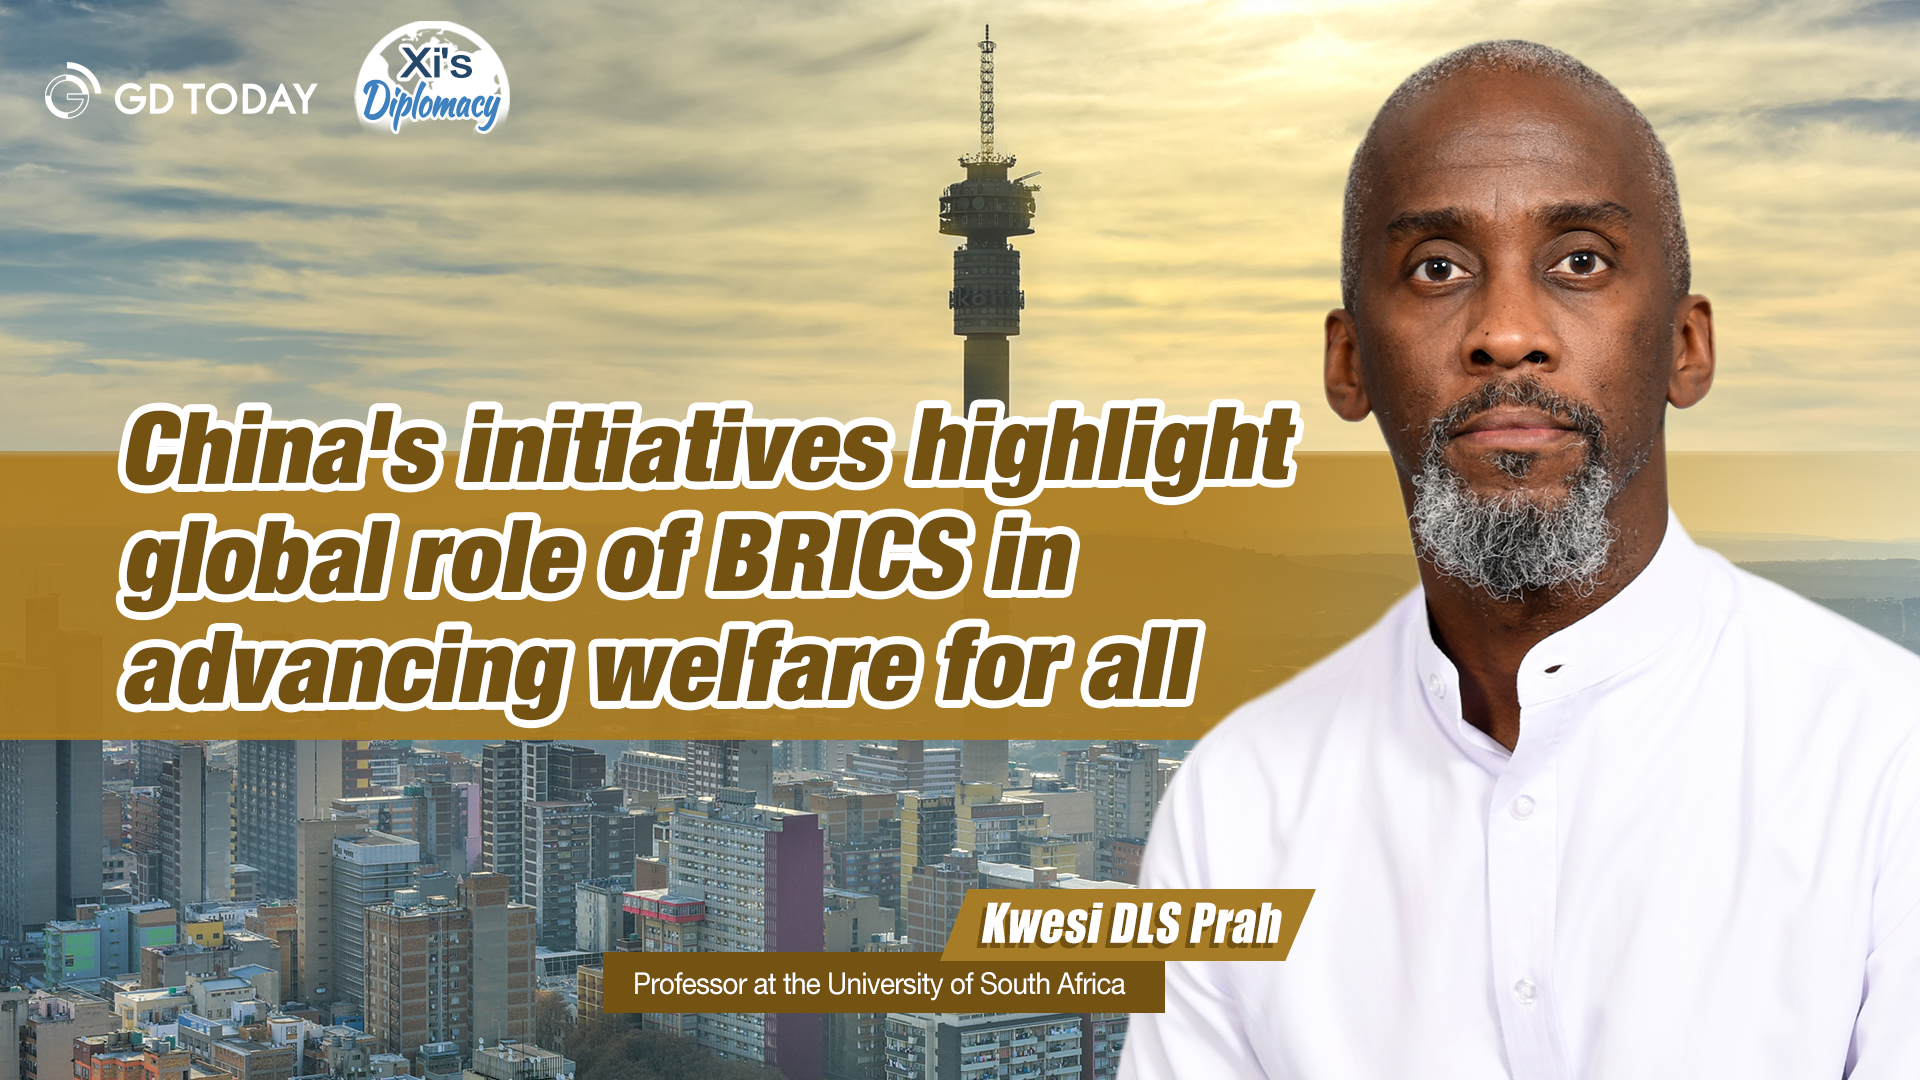 China's initiatives highlight global role of BRICS in advancing welfare for all: Professor at the University of South Africa